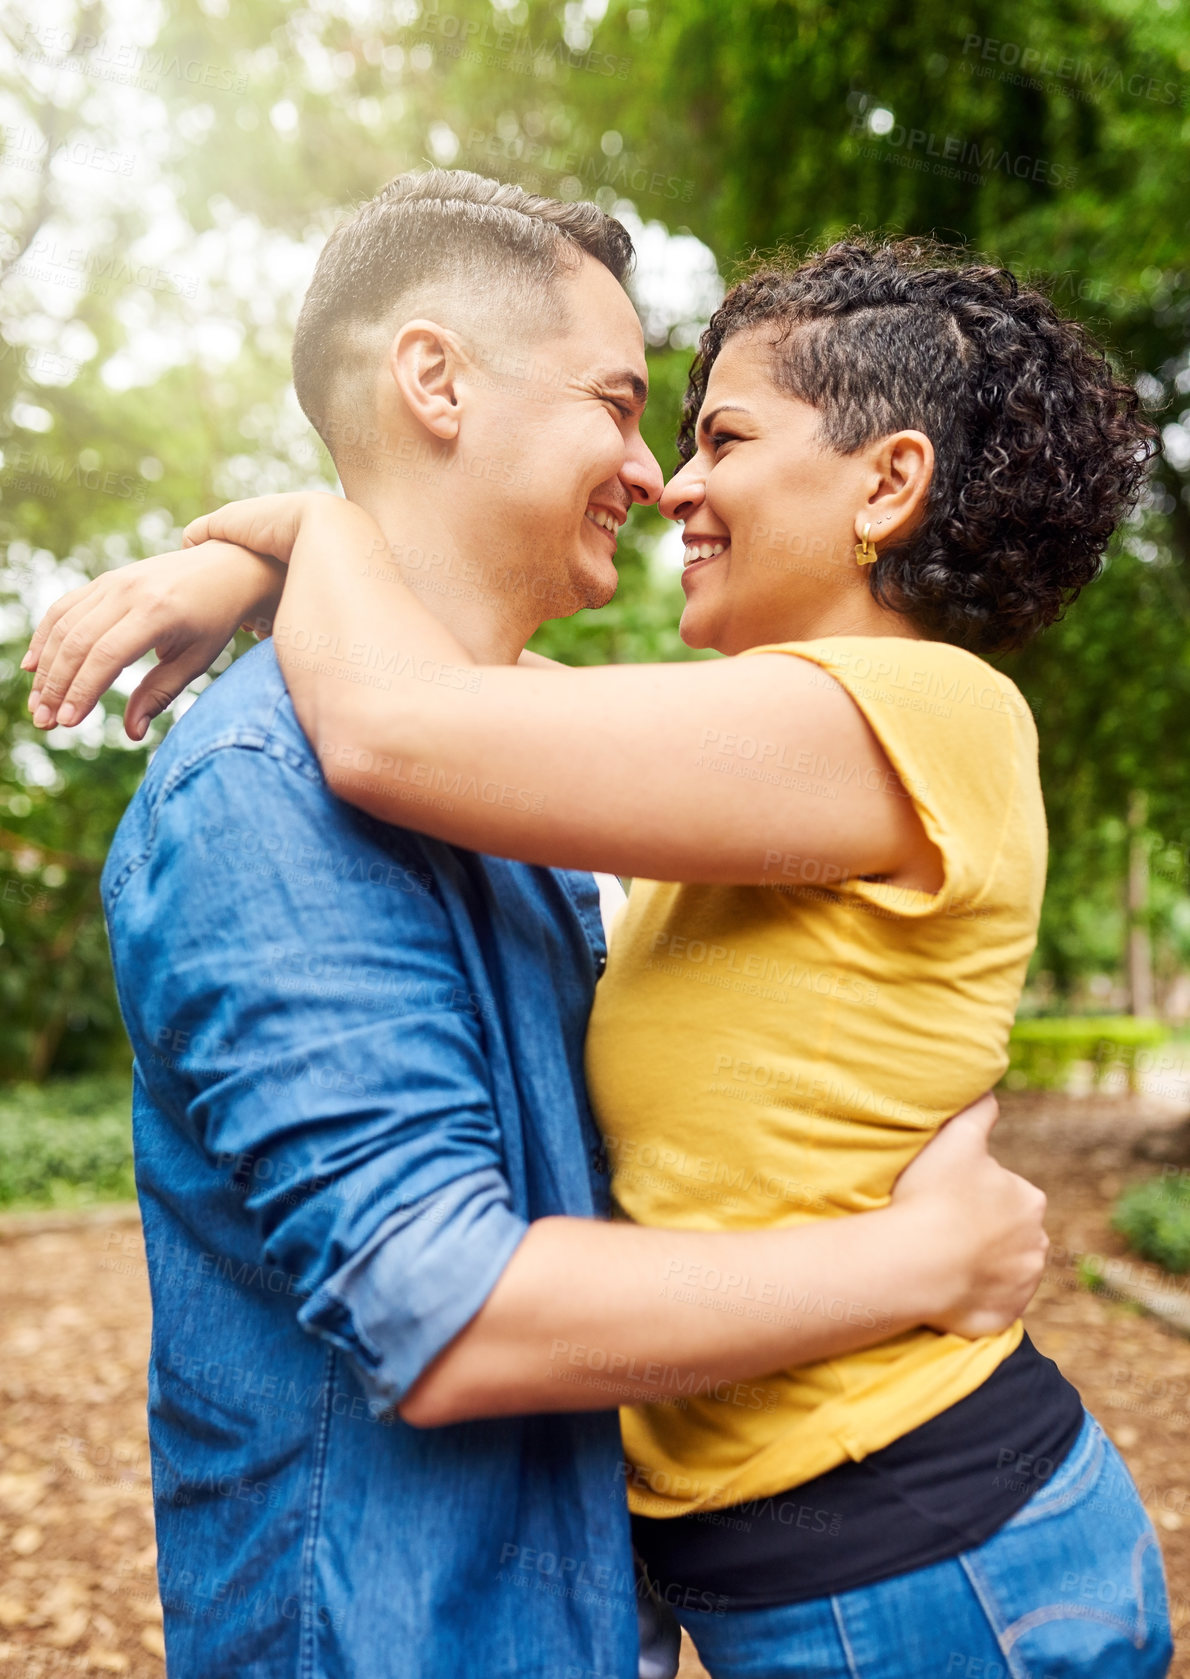 Buy stock photo Cropped shot of an affectionate young couple embracing while standing outside in the park